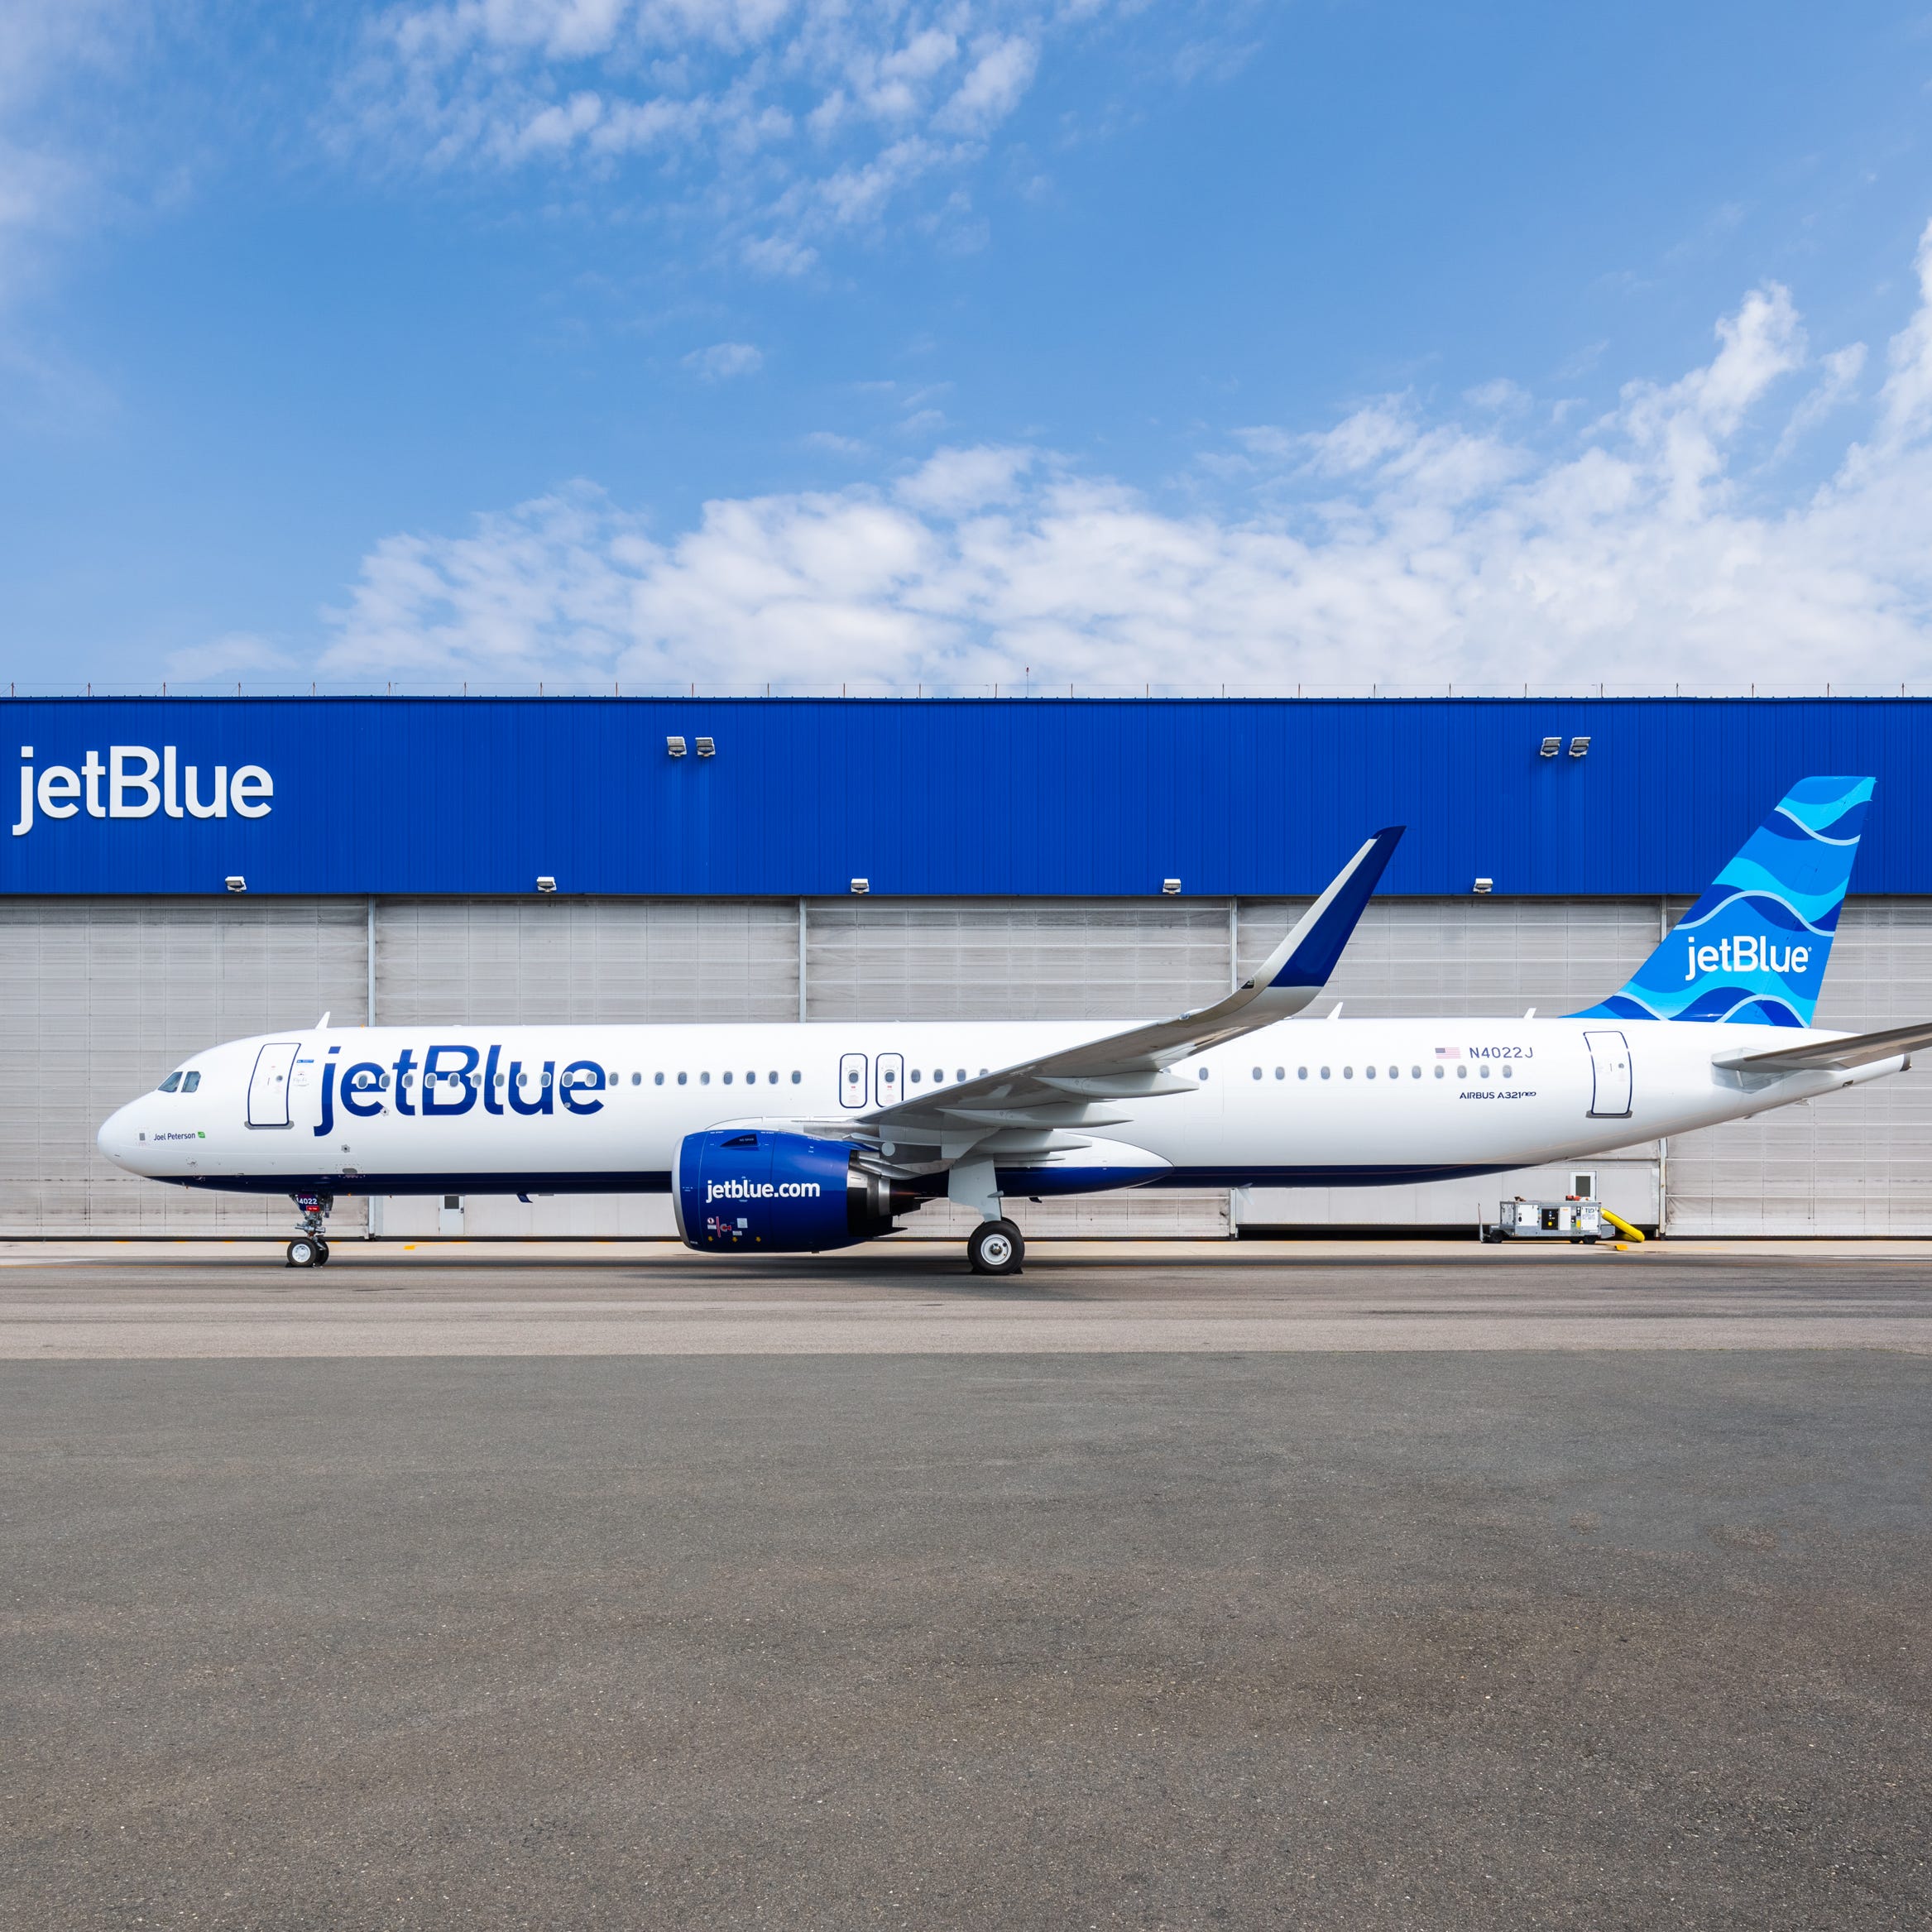 A JetBlue Airbus A321LR outside of one of the airline's hangars.